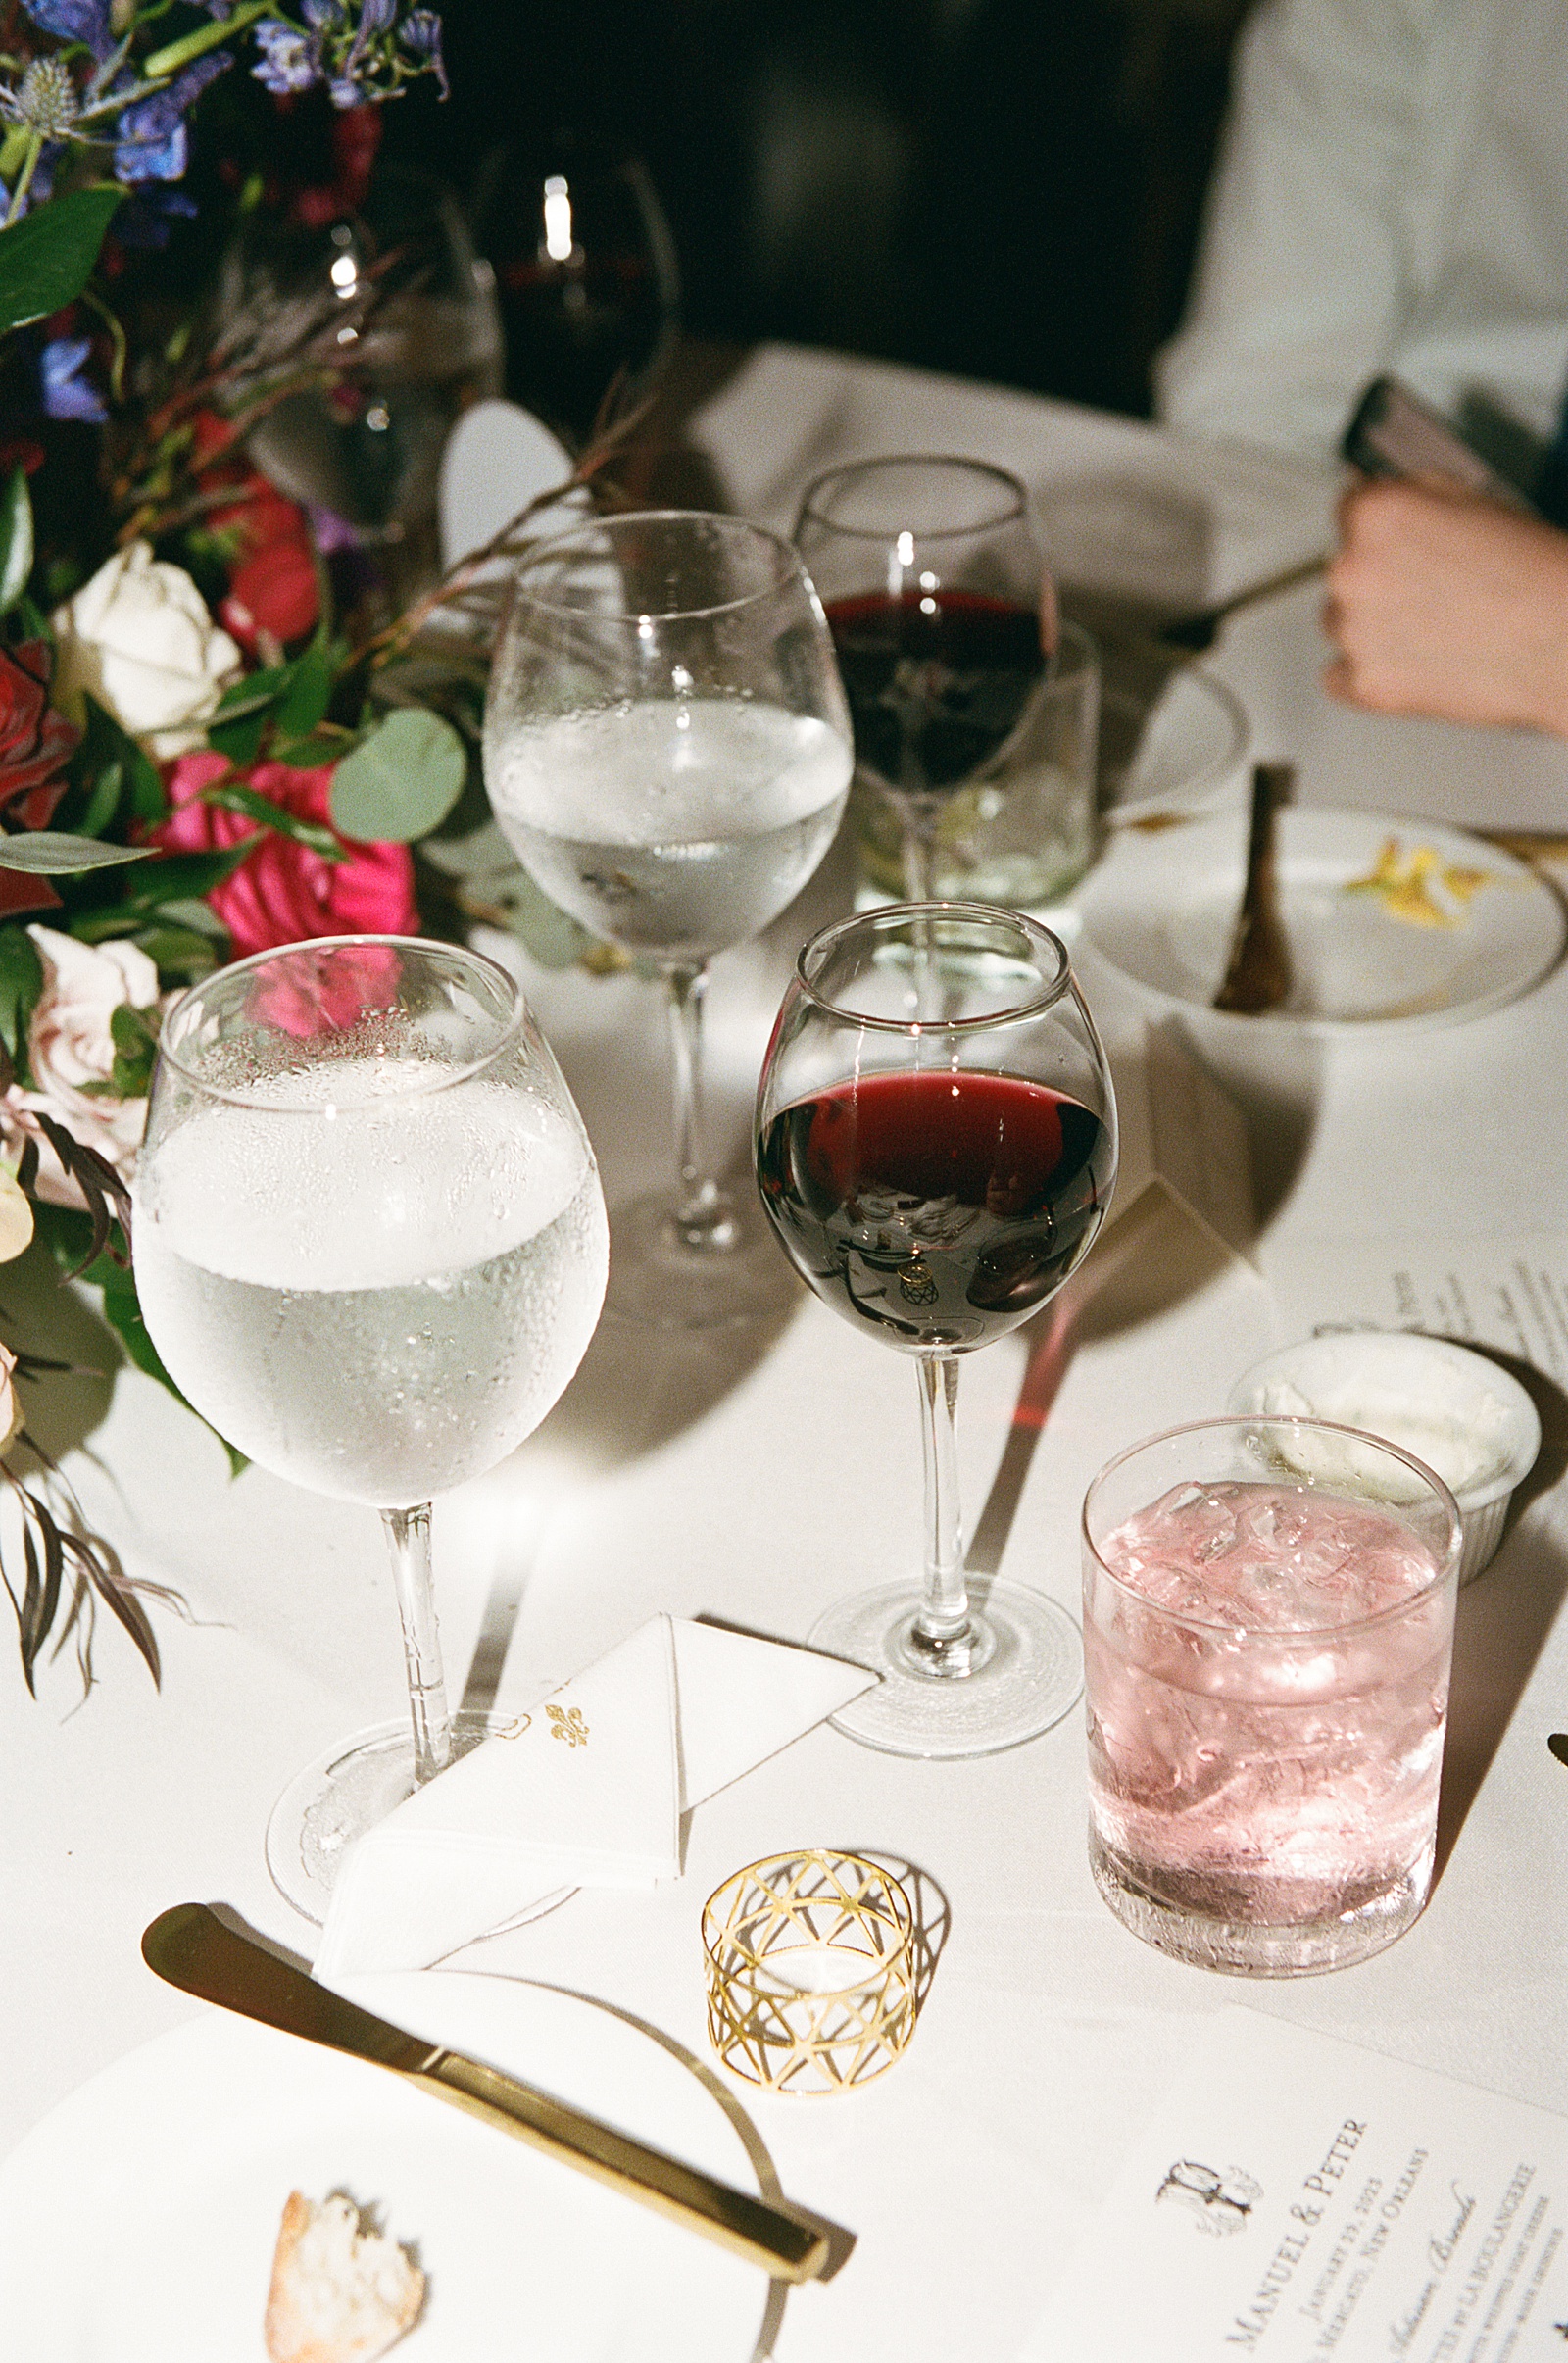 A pink cocktail sits beside a glass of red wine in a photo using direct flash photography.